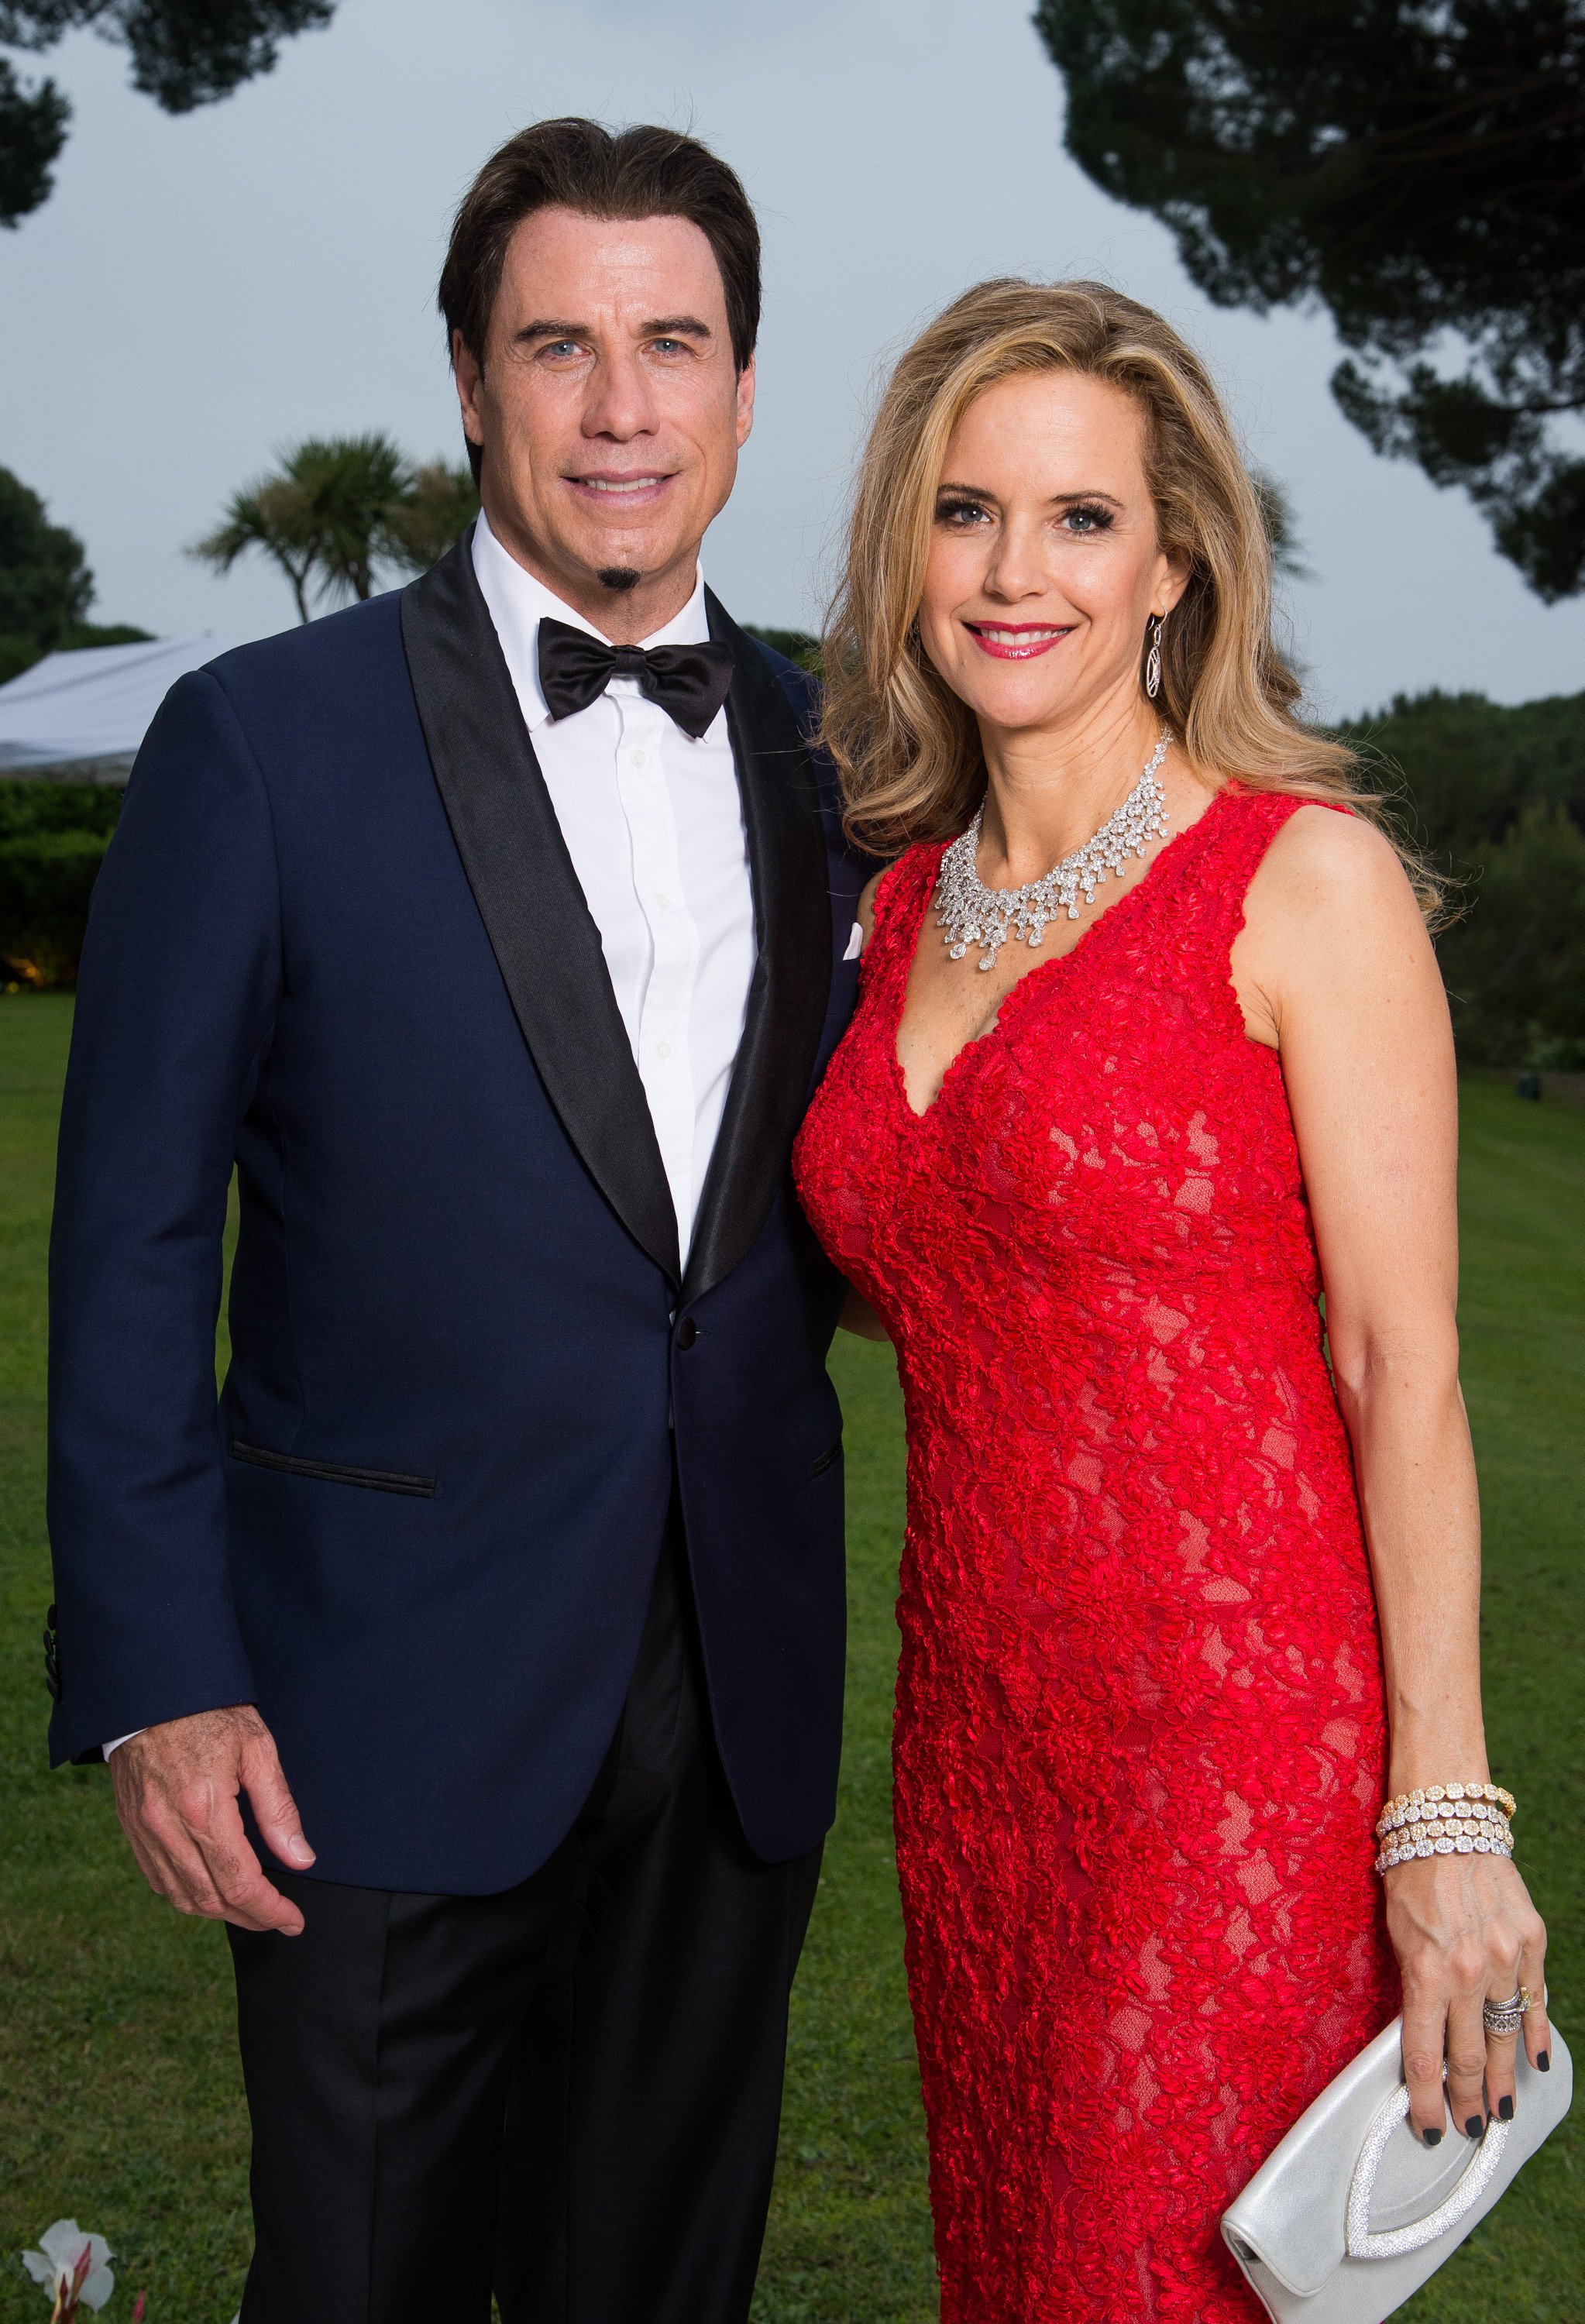 John Travolta and Kelly Preston pose for a portrait at amfAR's 21st Cinema Against AIDS Gala Presented By WORLDVIEW, BOLD FILMS, And BVLGARI at Hotel du Cap-Eden-Roc on May 22, 2014, in Cap d'Antibes, France. | Source: Getty Images